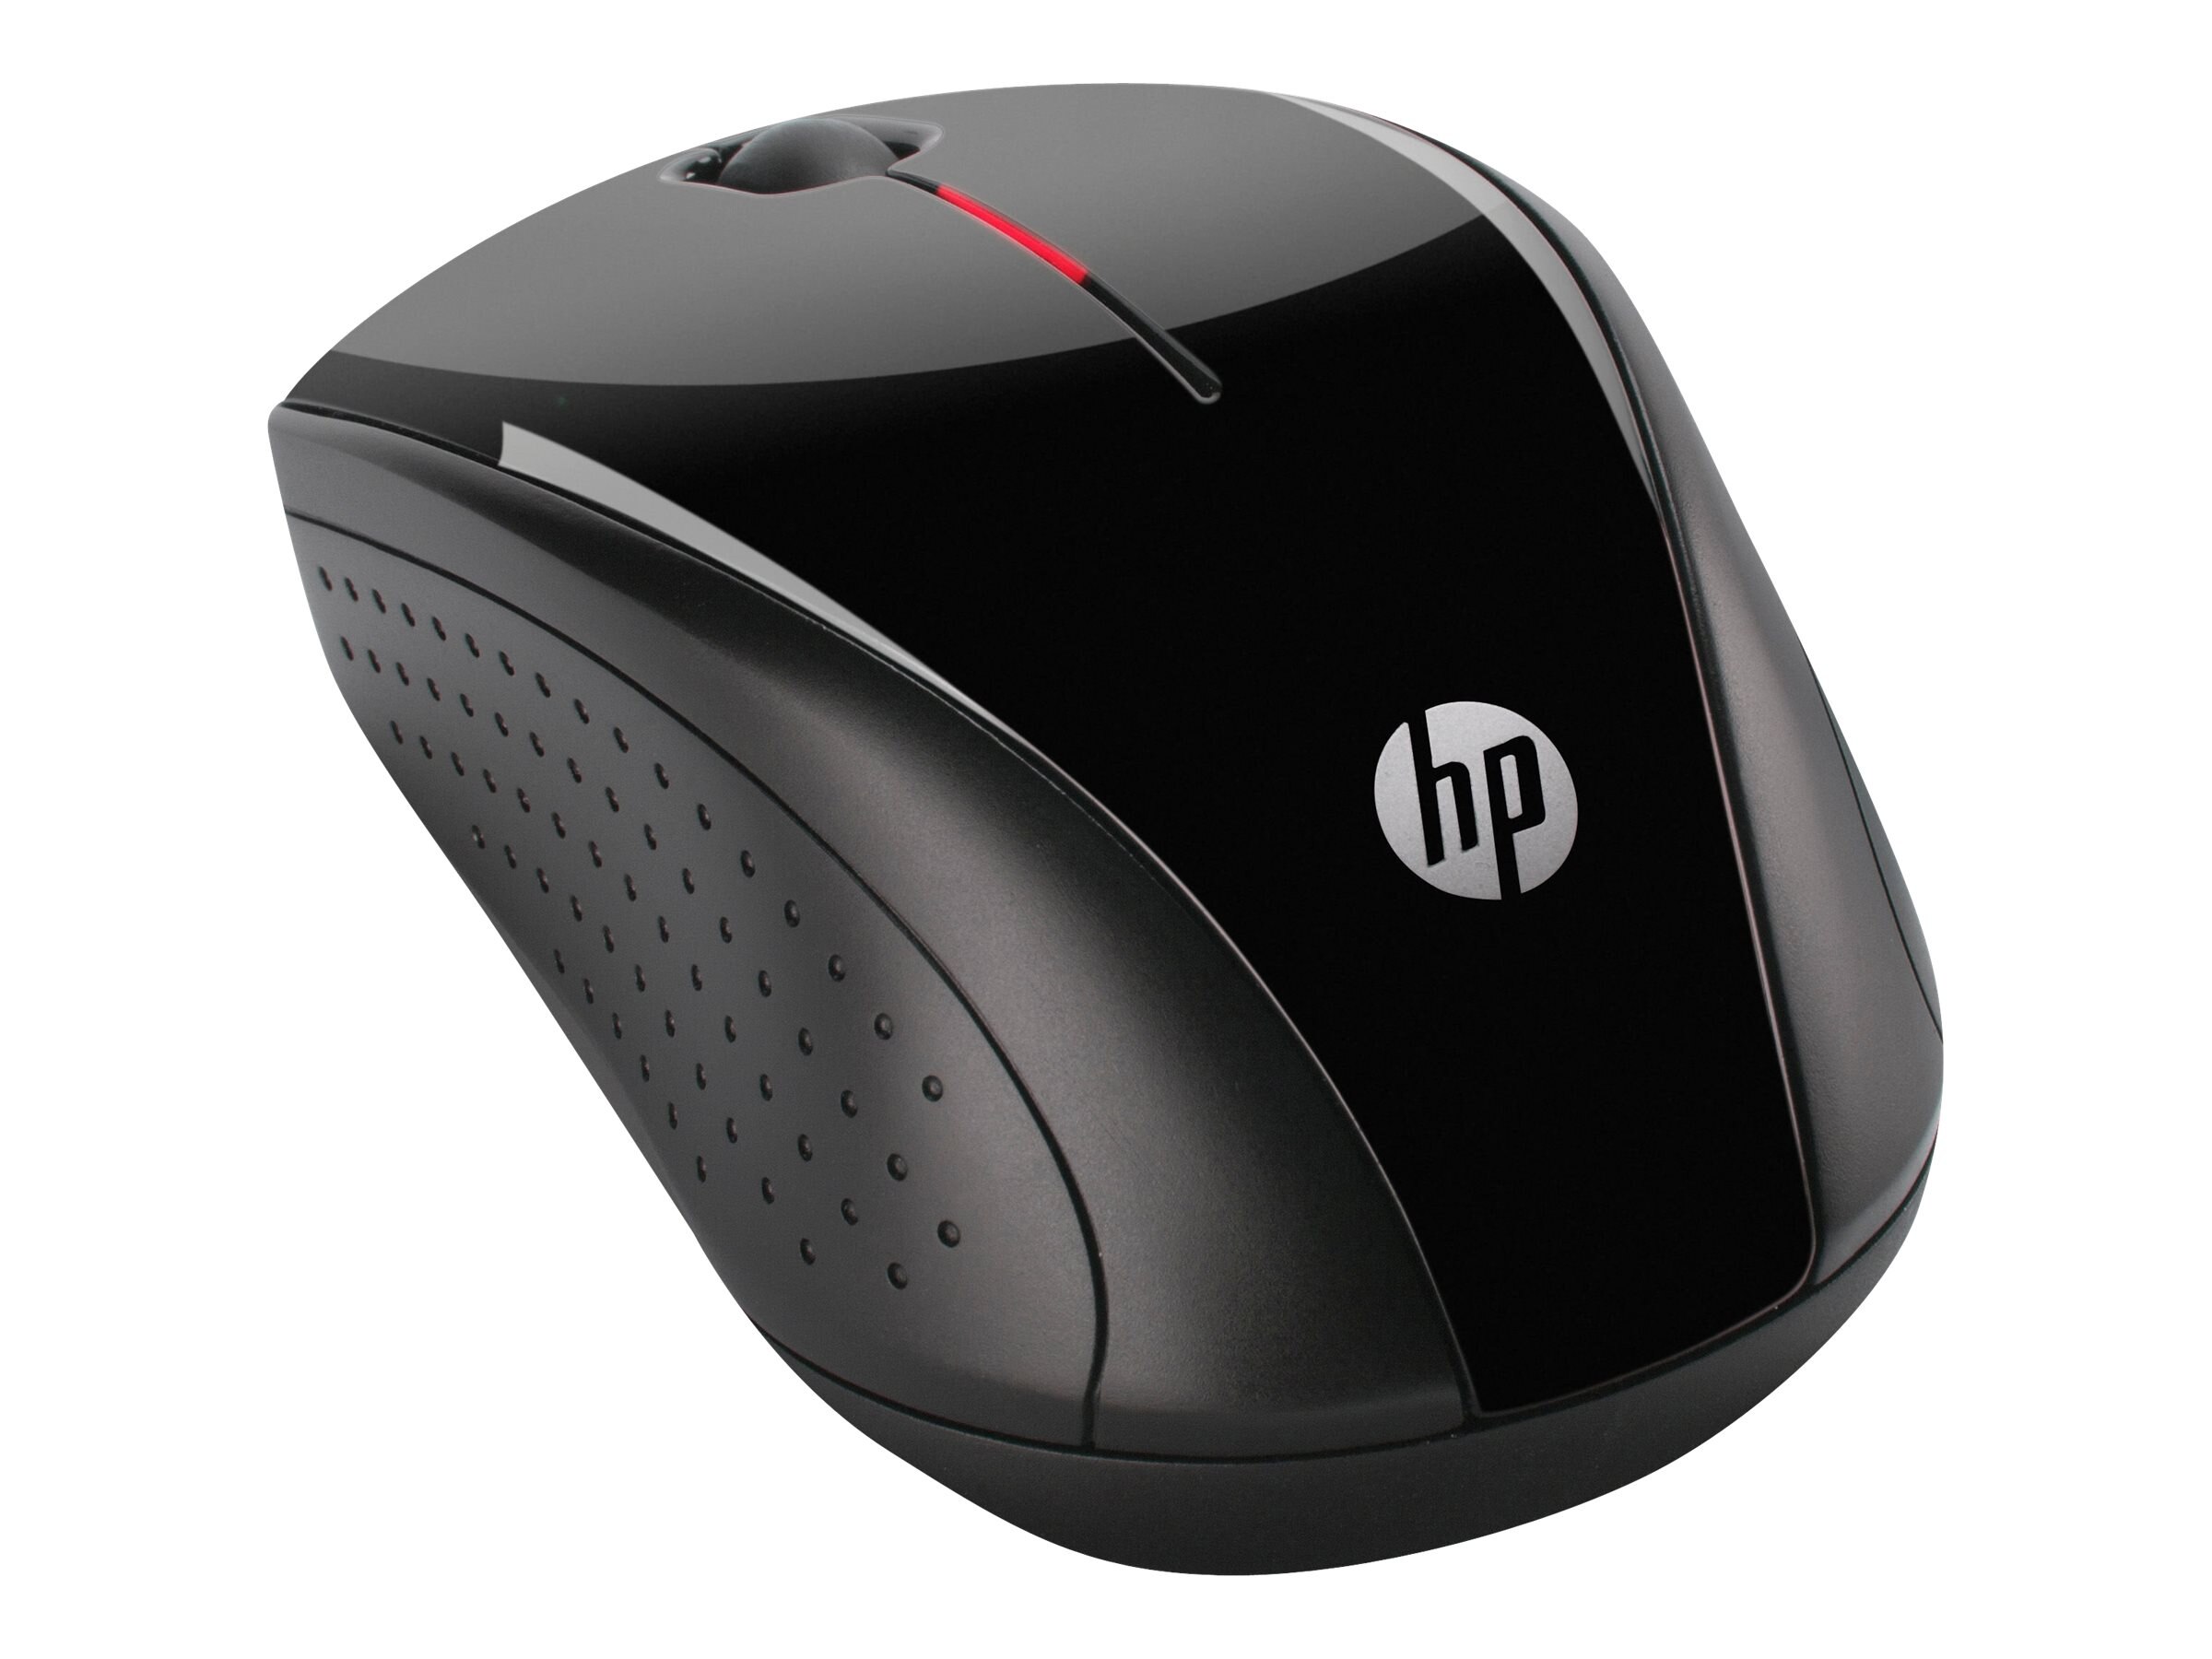 remove battery cover in hp wireless mouse x3000